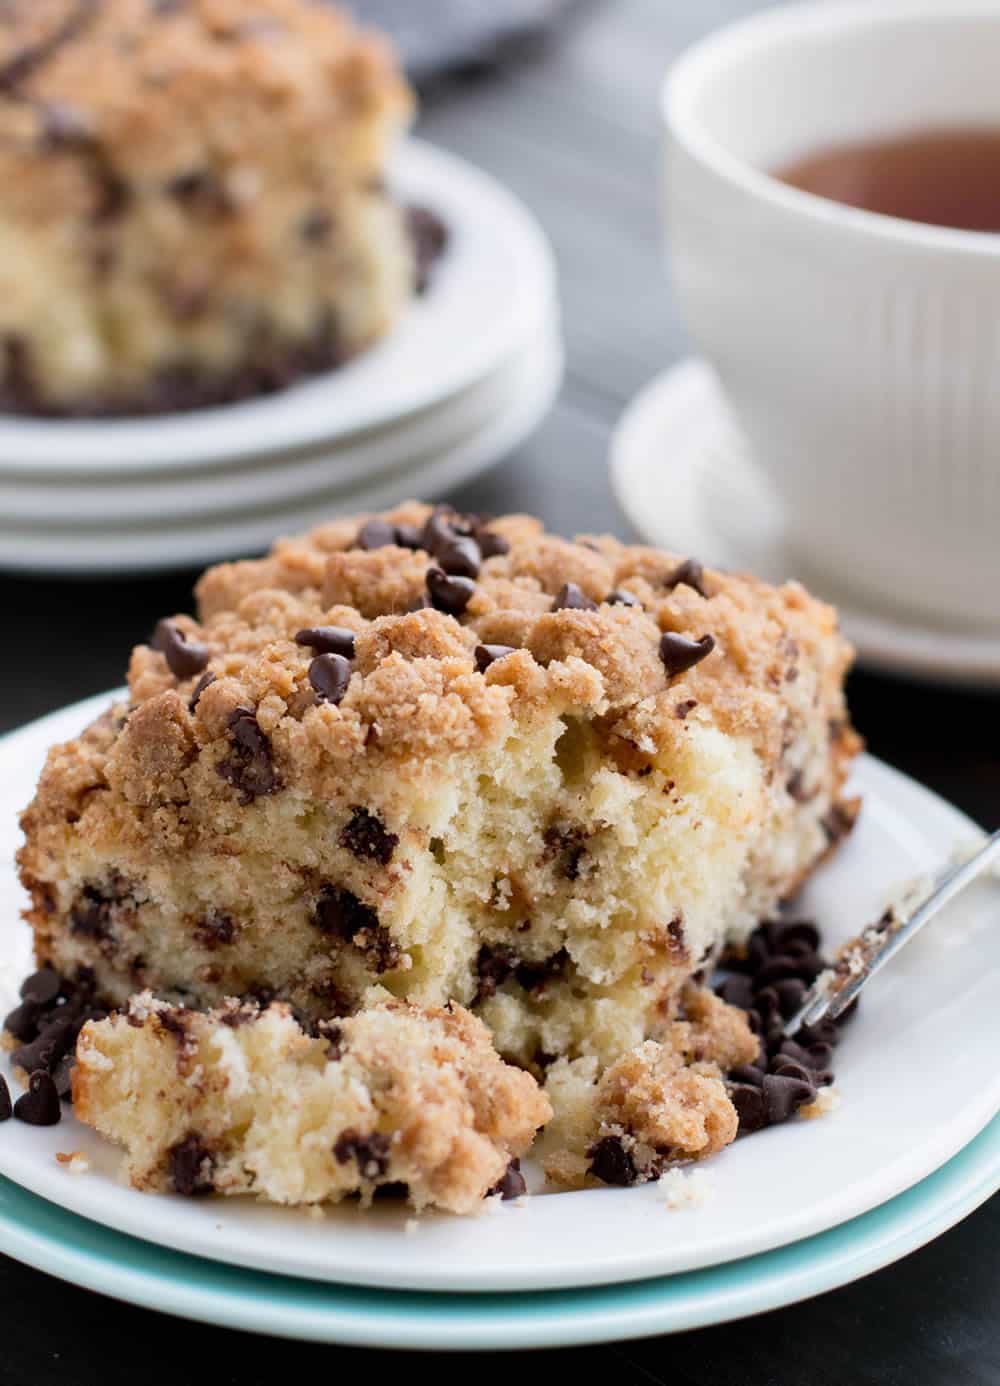 Chocolate Chip Crumb Cake. A delicious breakfast cake, rich with sour cream and butter, dotted with chocolate chips and crowned with a sweet crumb topping.